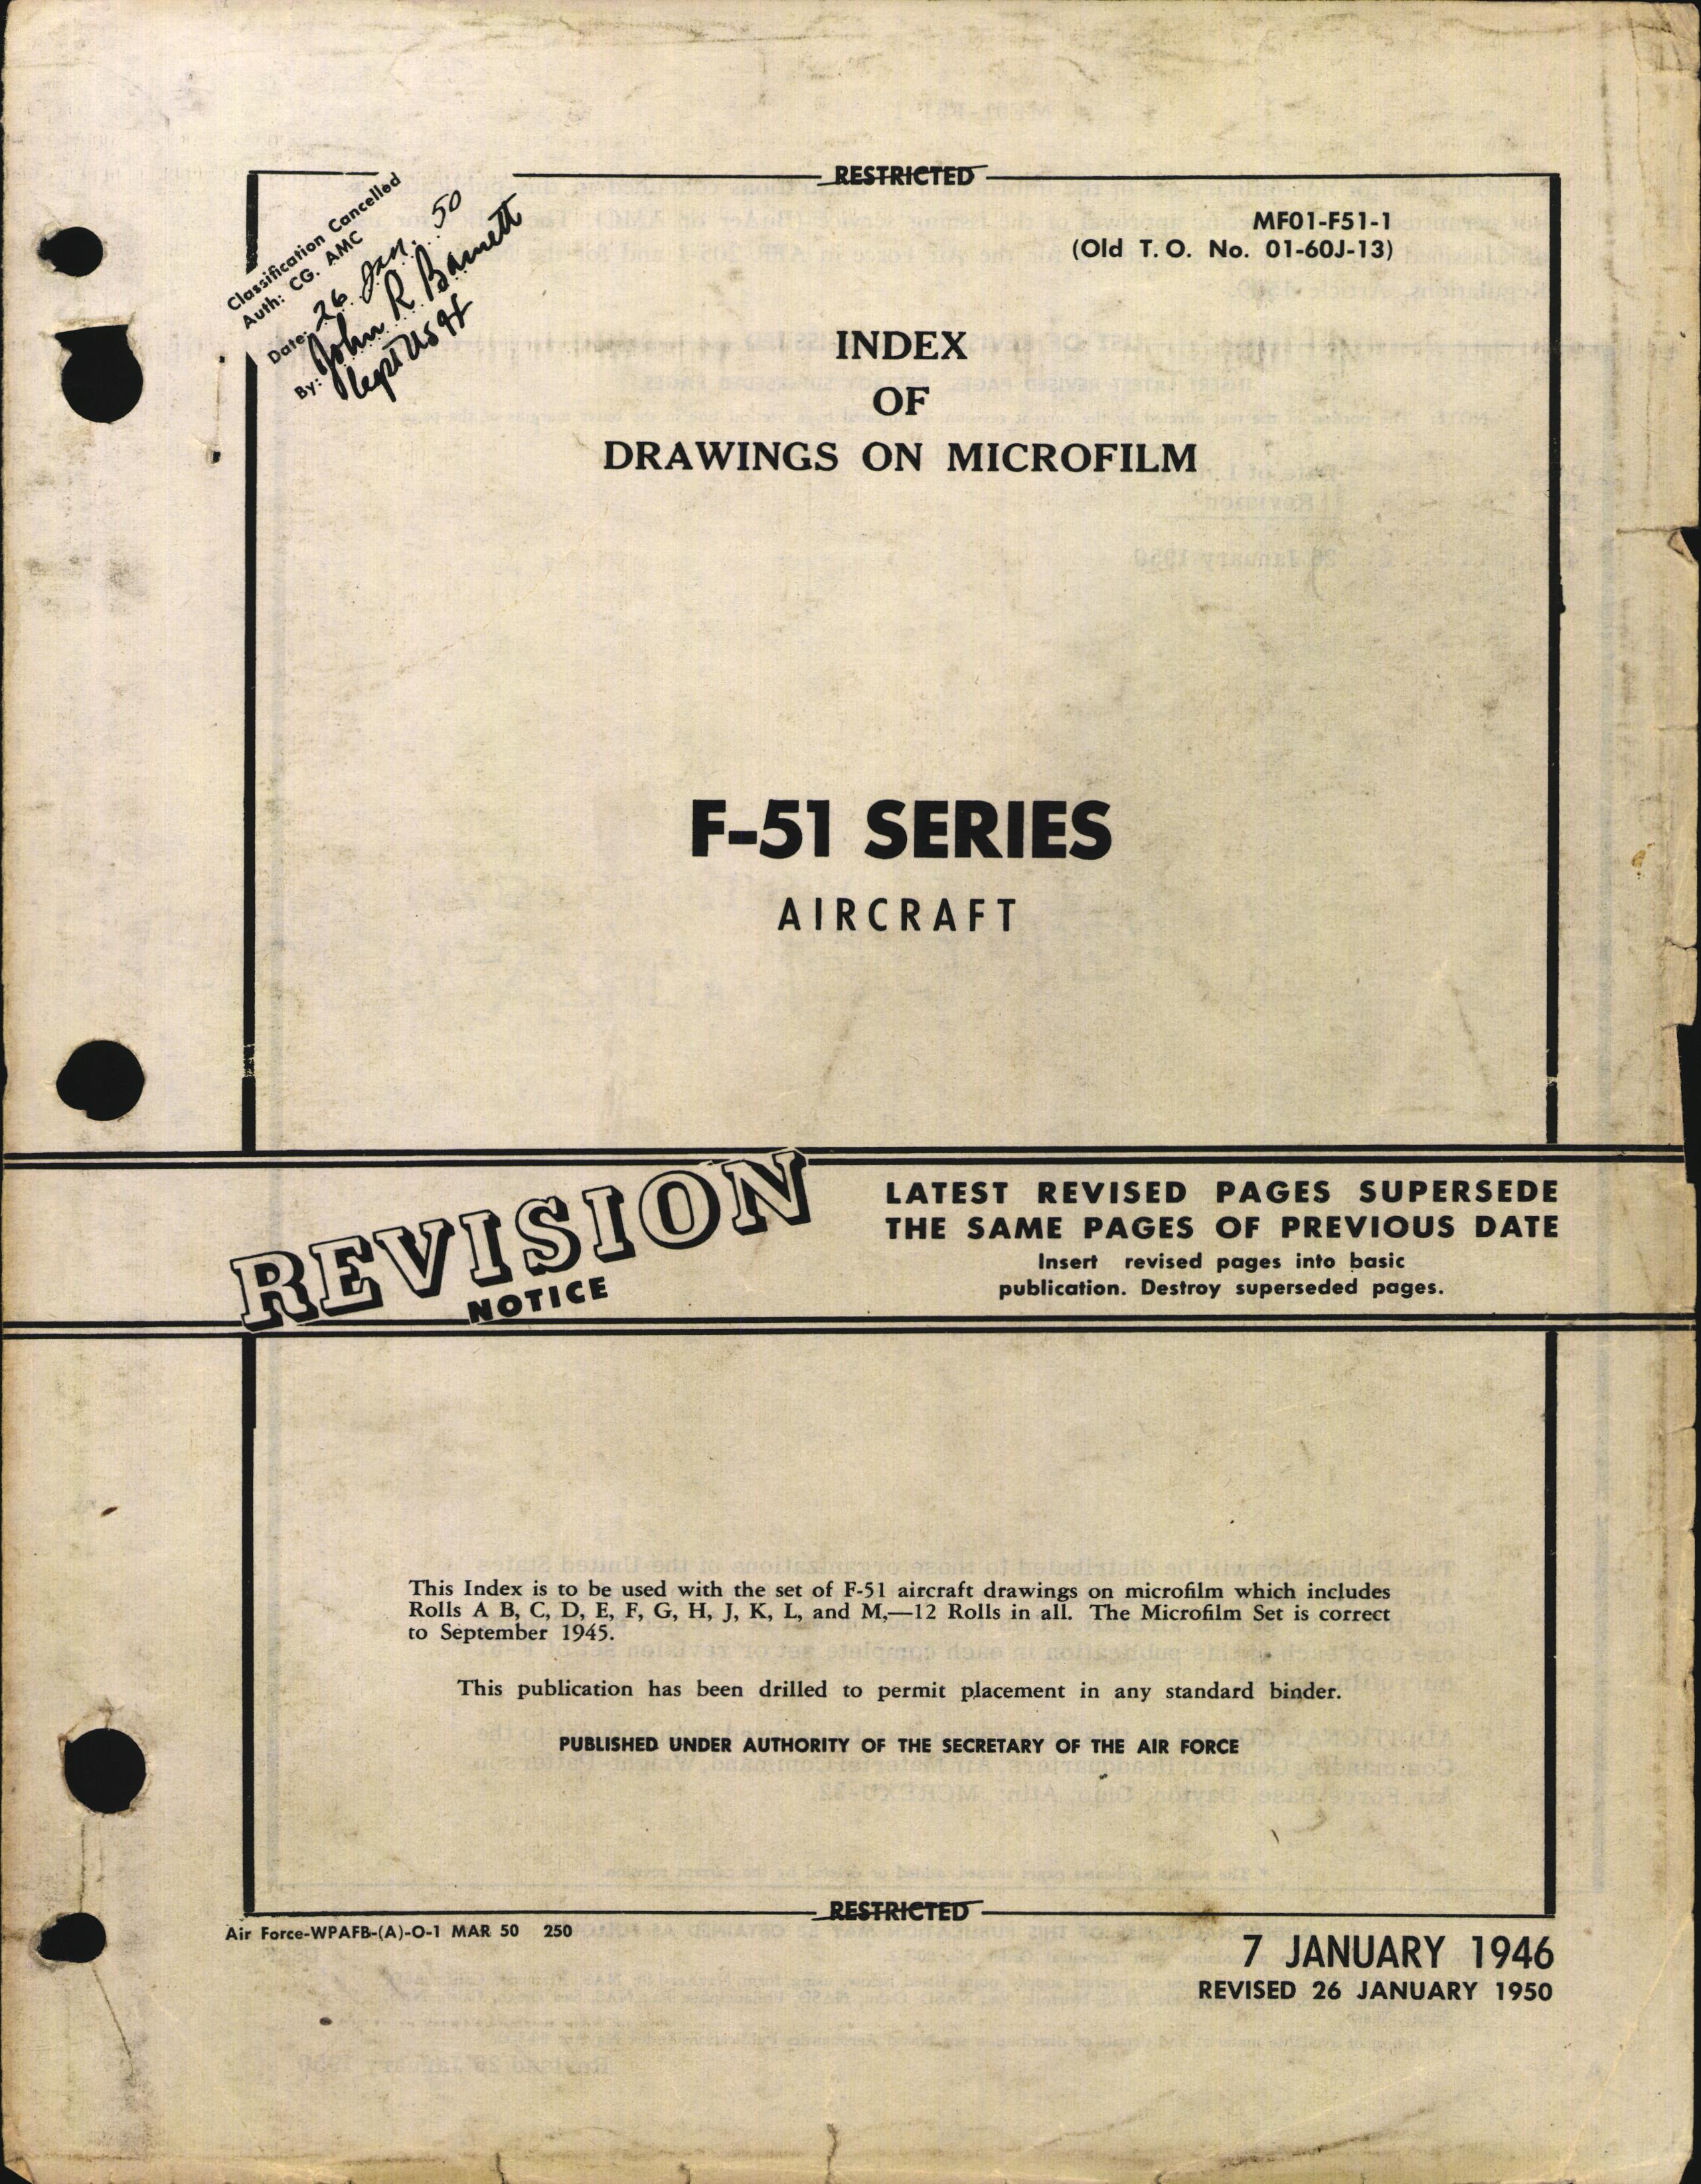 Sample page 1 from AirCorps Library document: Index of Drawings on Microfilm for P-51 Series Aircraft